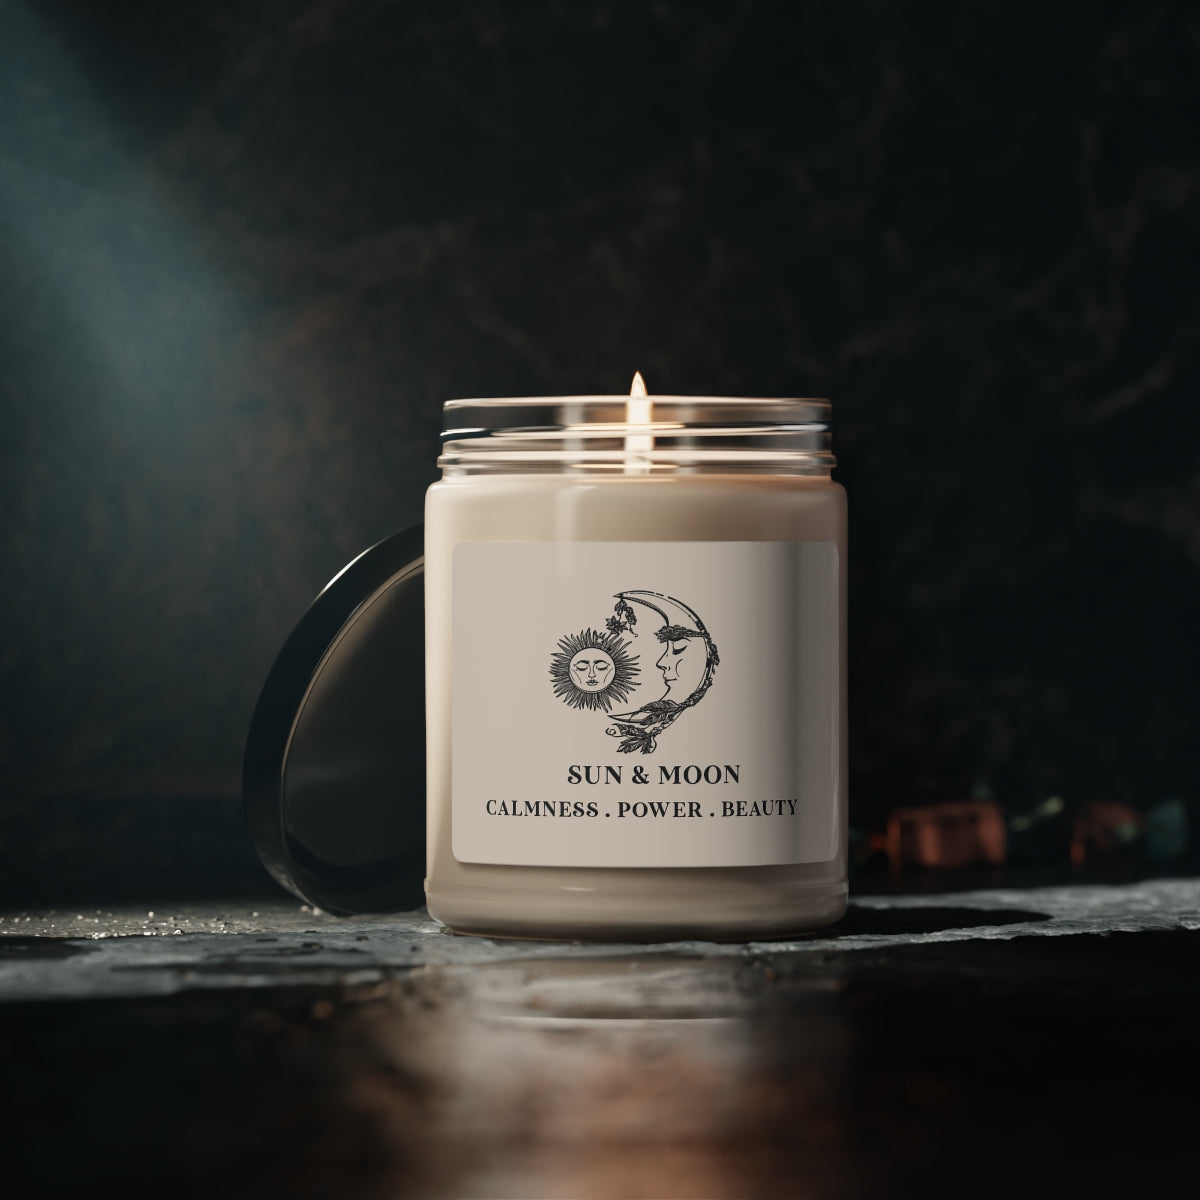 Sun & Moon Scented Candle